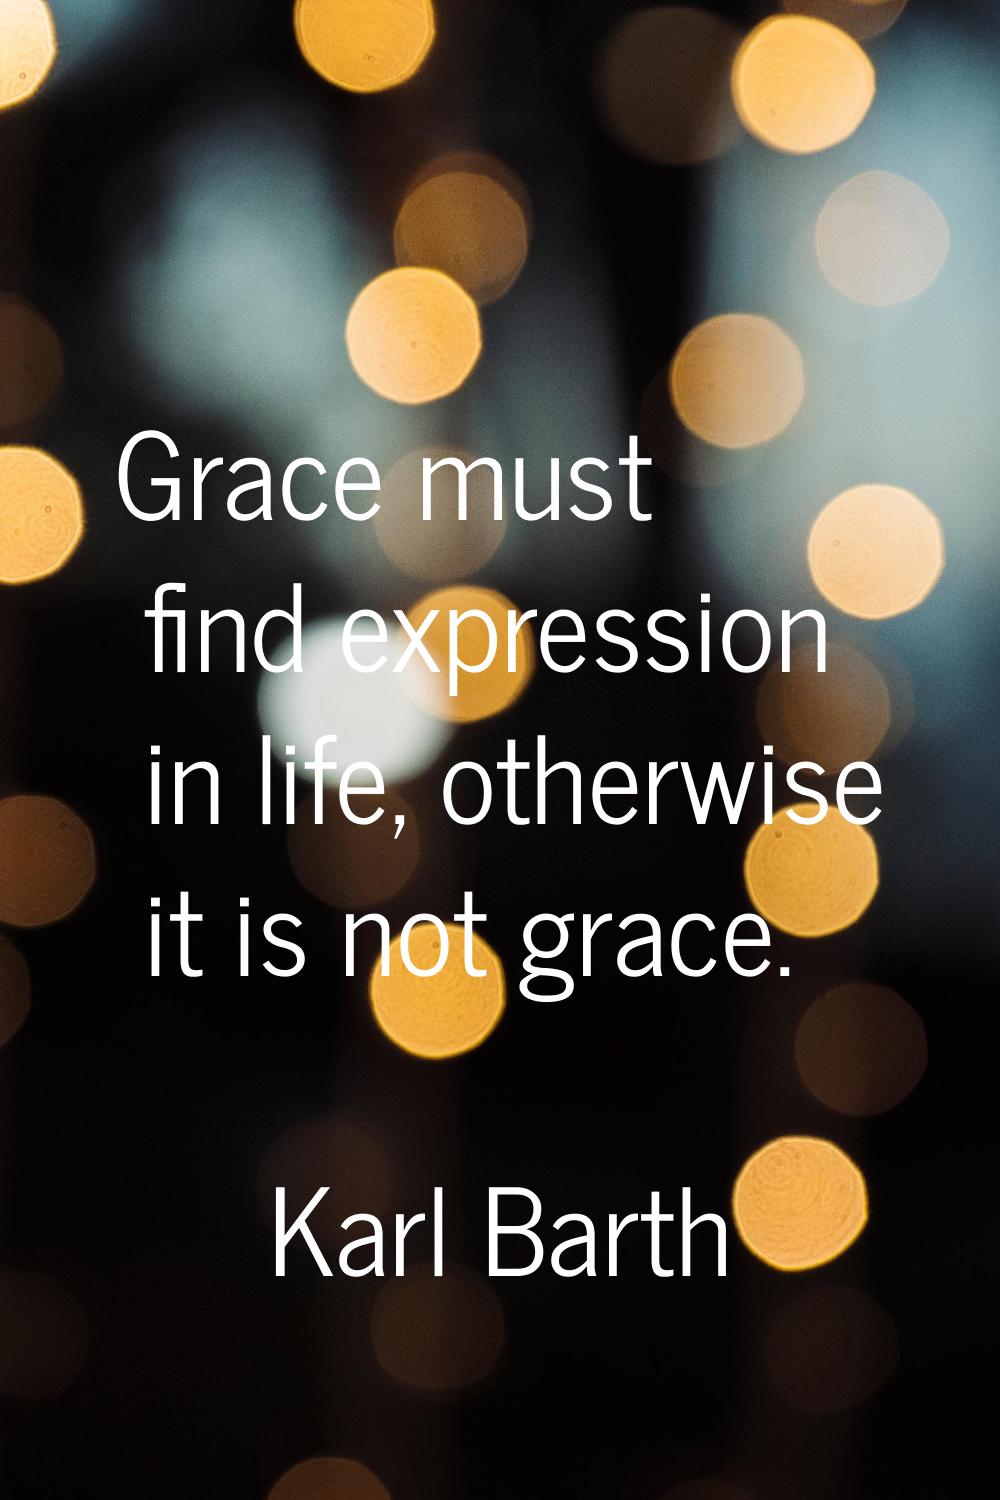 Grace must find expression in life, otherwise it is not grace.